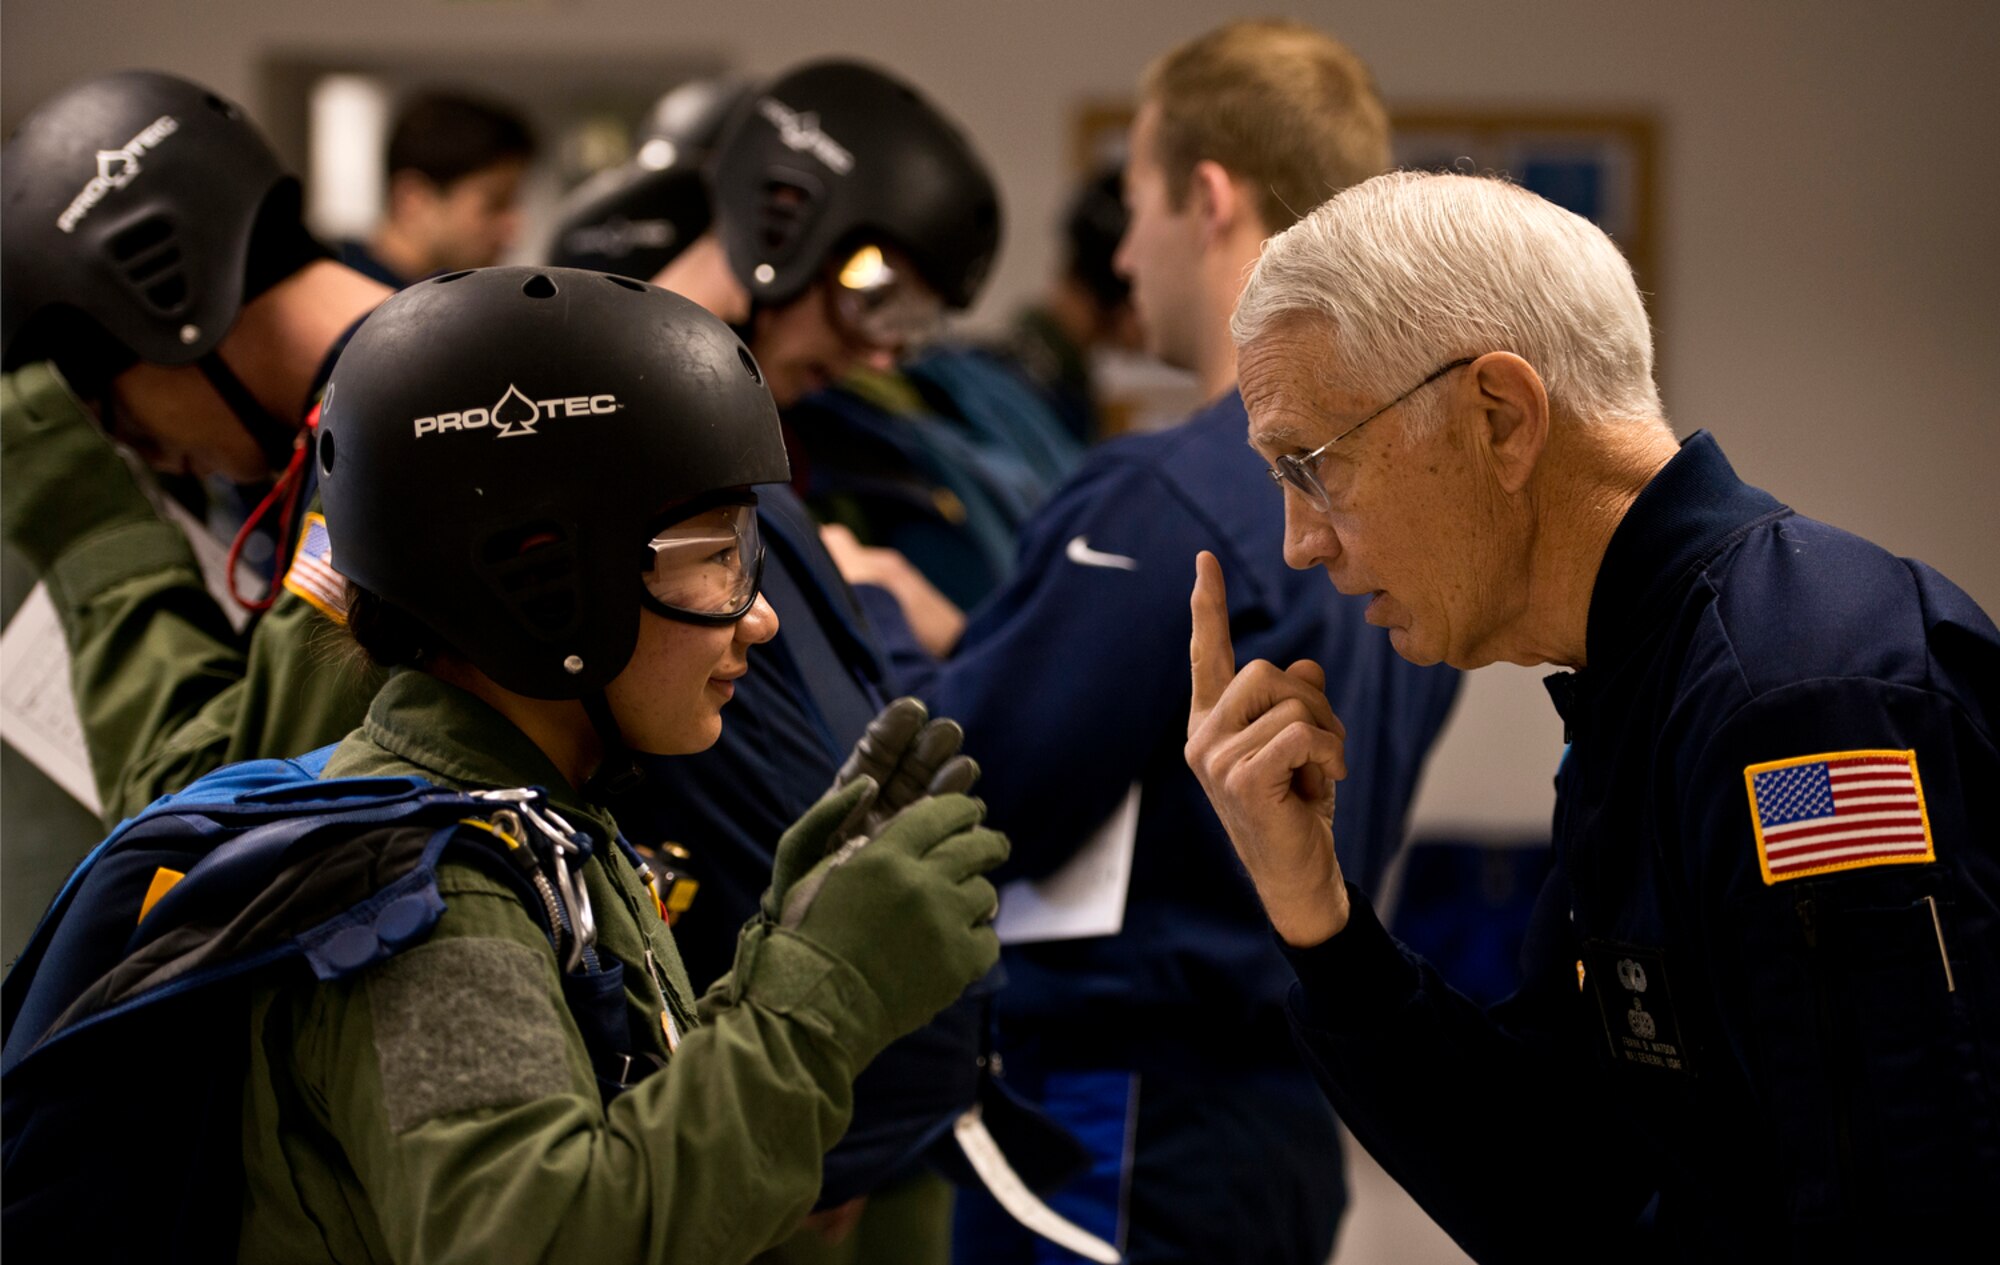 Retired Major Gen. Frank Watson provides a pep talk to Cadet 1st Class Crystal Johnson as she prepares for her first free-fall parachute jump. Gen. Watson also jumped in the AM490 program at the age of 50 and now comes to the academy to help motivate cadets before their initial jump. (U.S. Air Force photo/Tech. Sgt. Bennie J. Davis III)